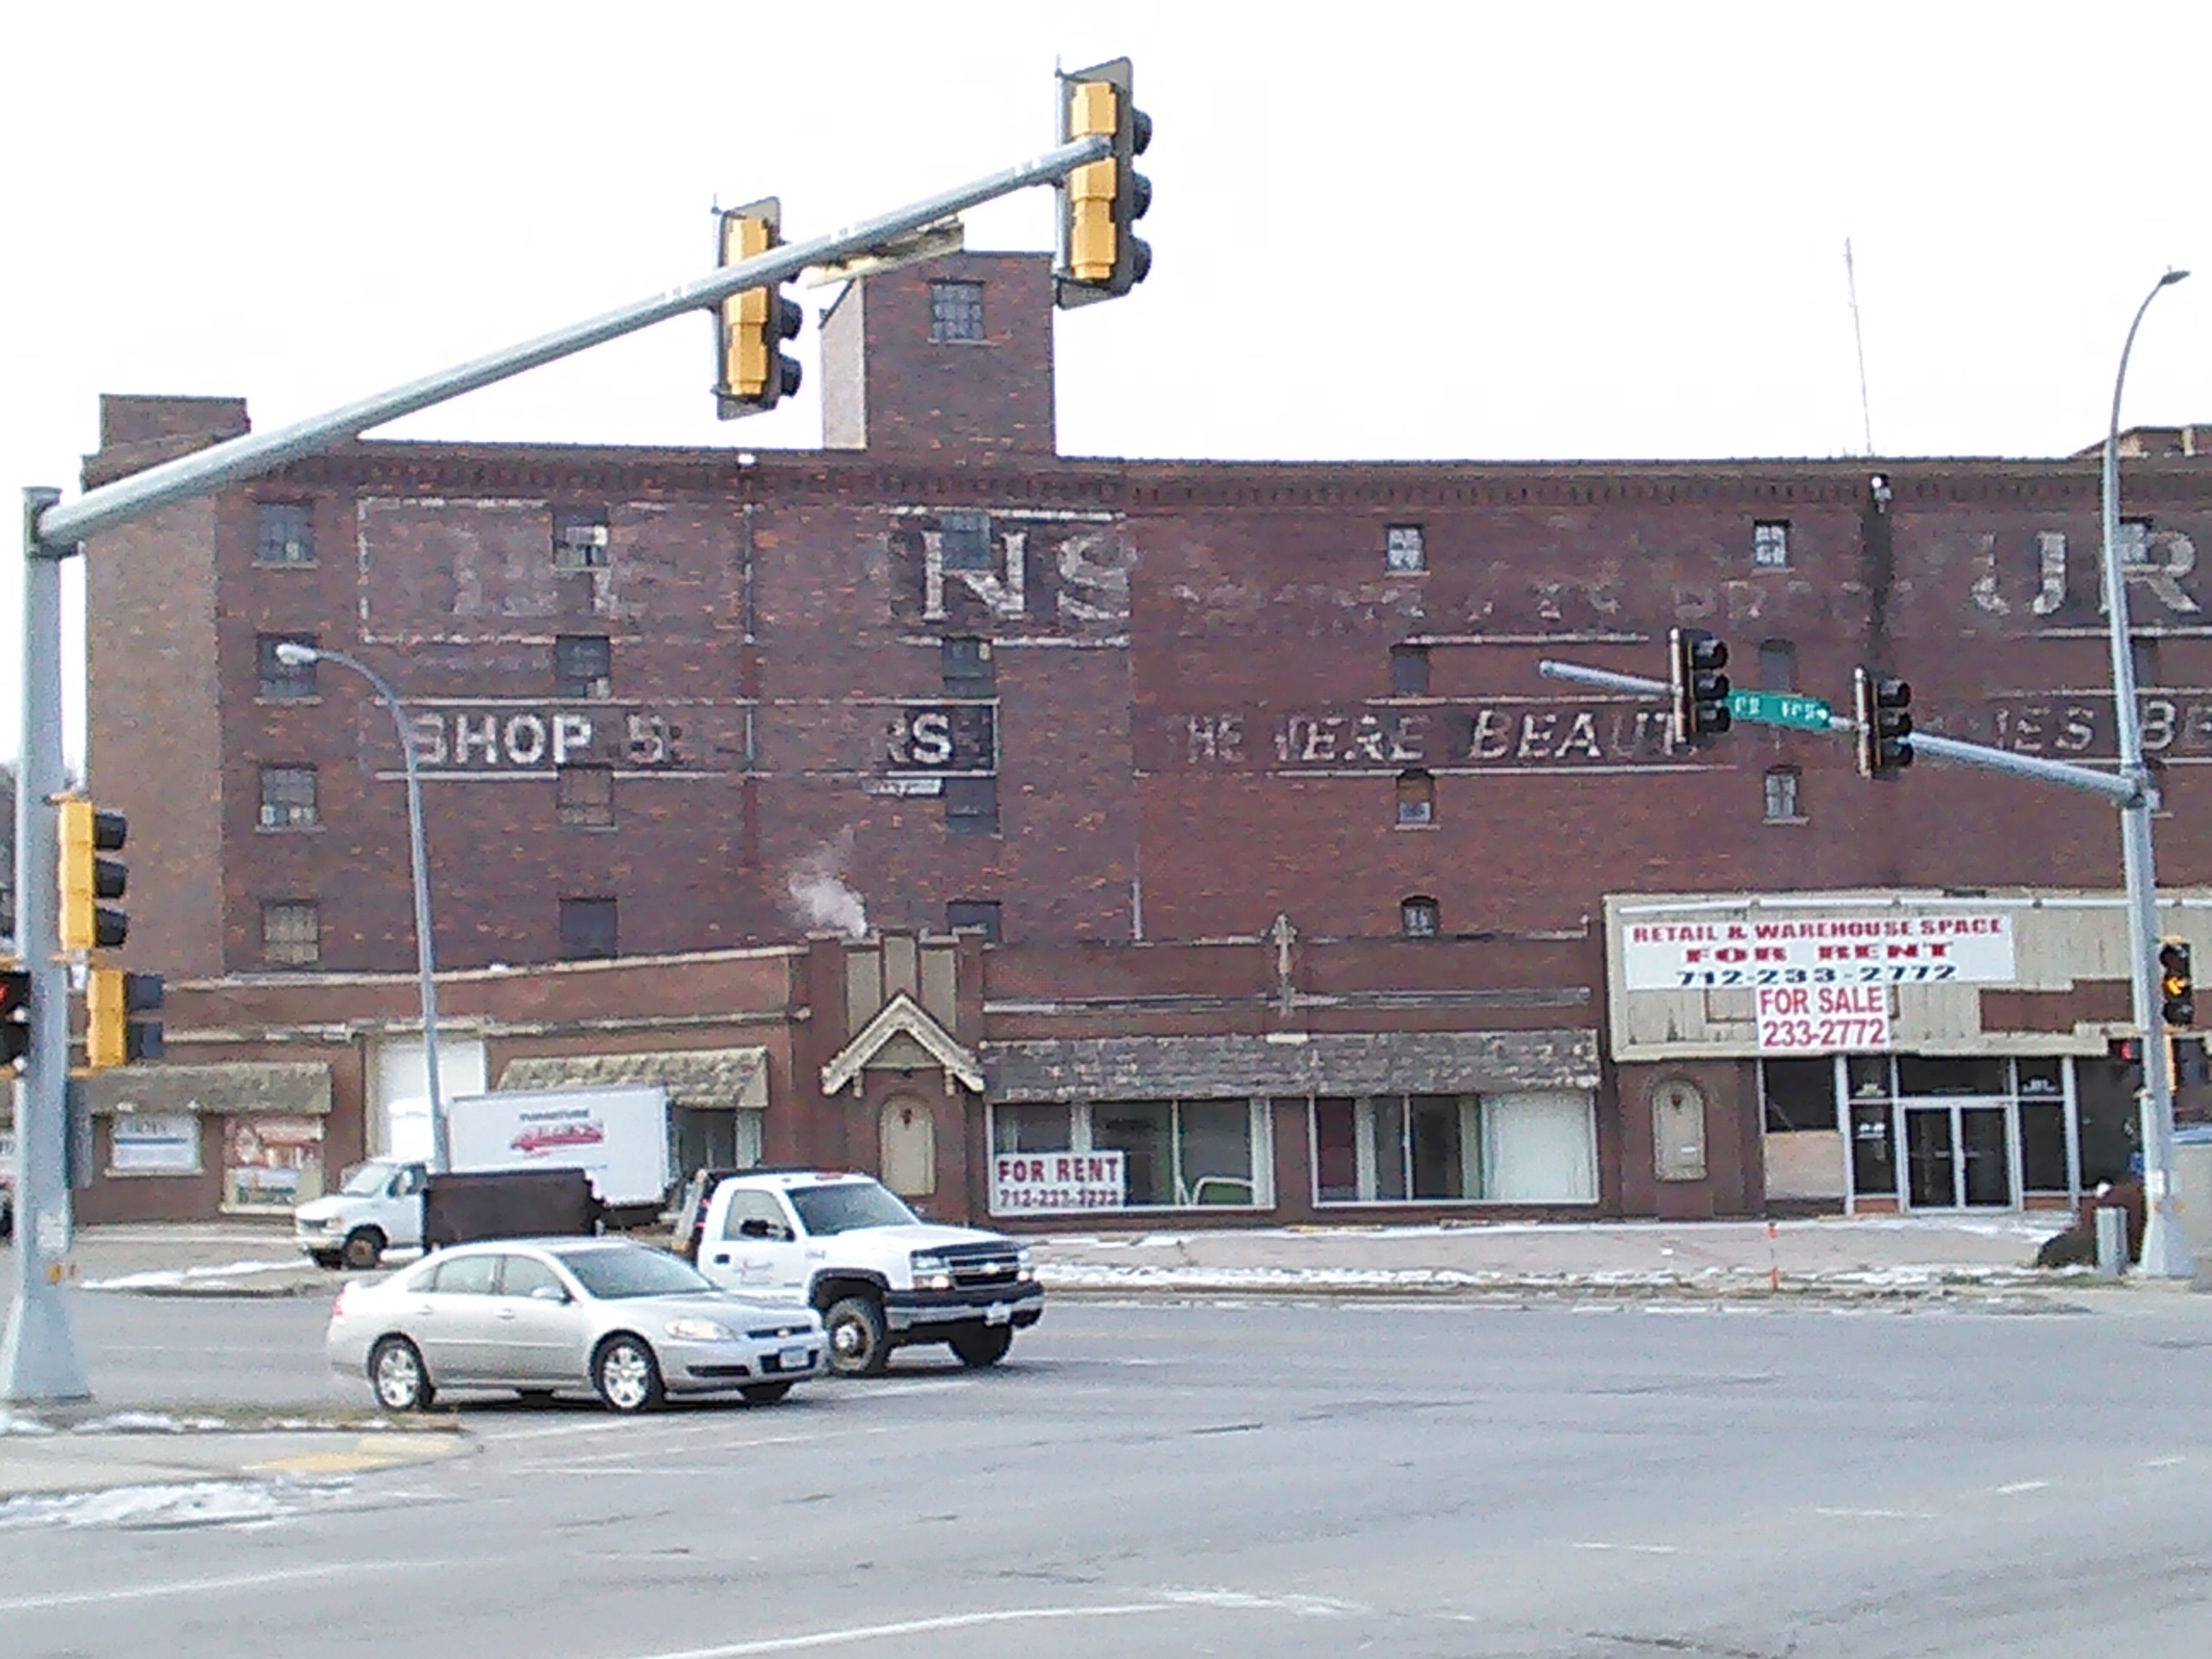 Bekins Building To Be Developed Into Downtown Apartments Kscj 1360